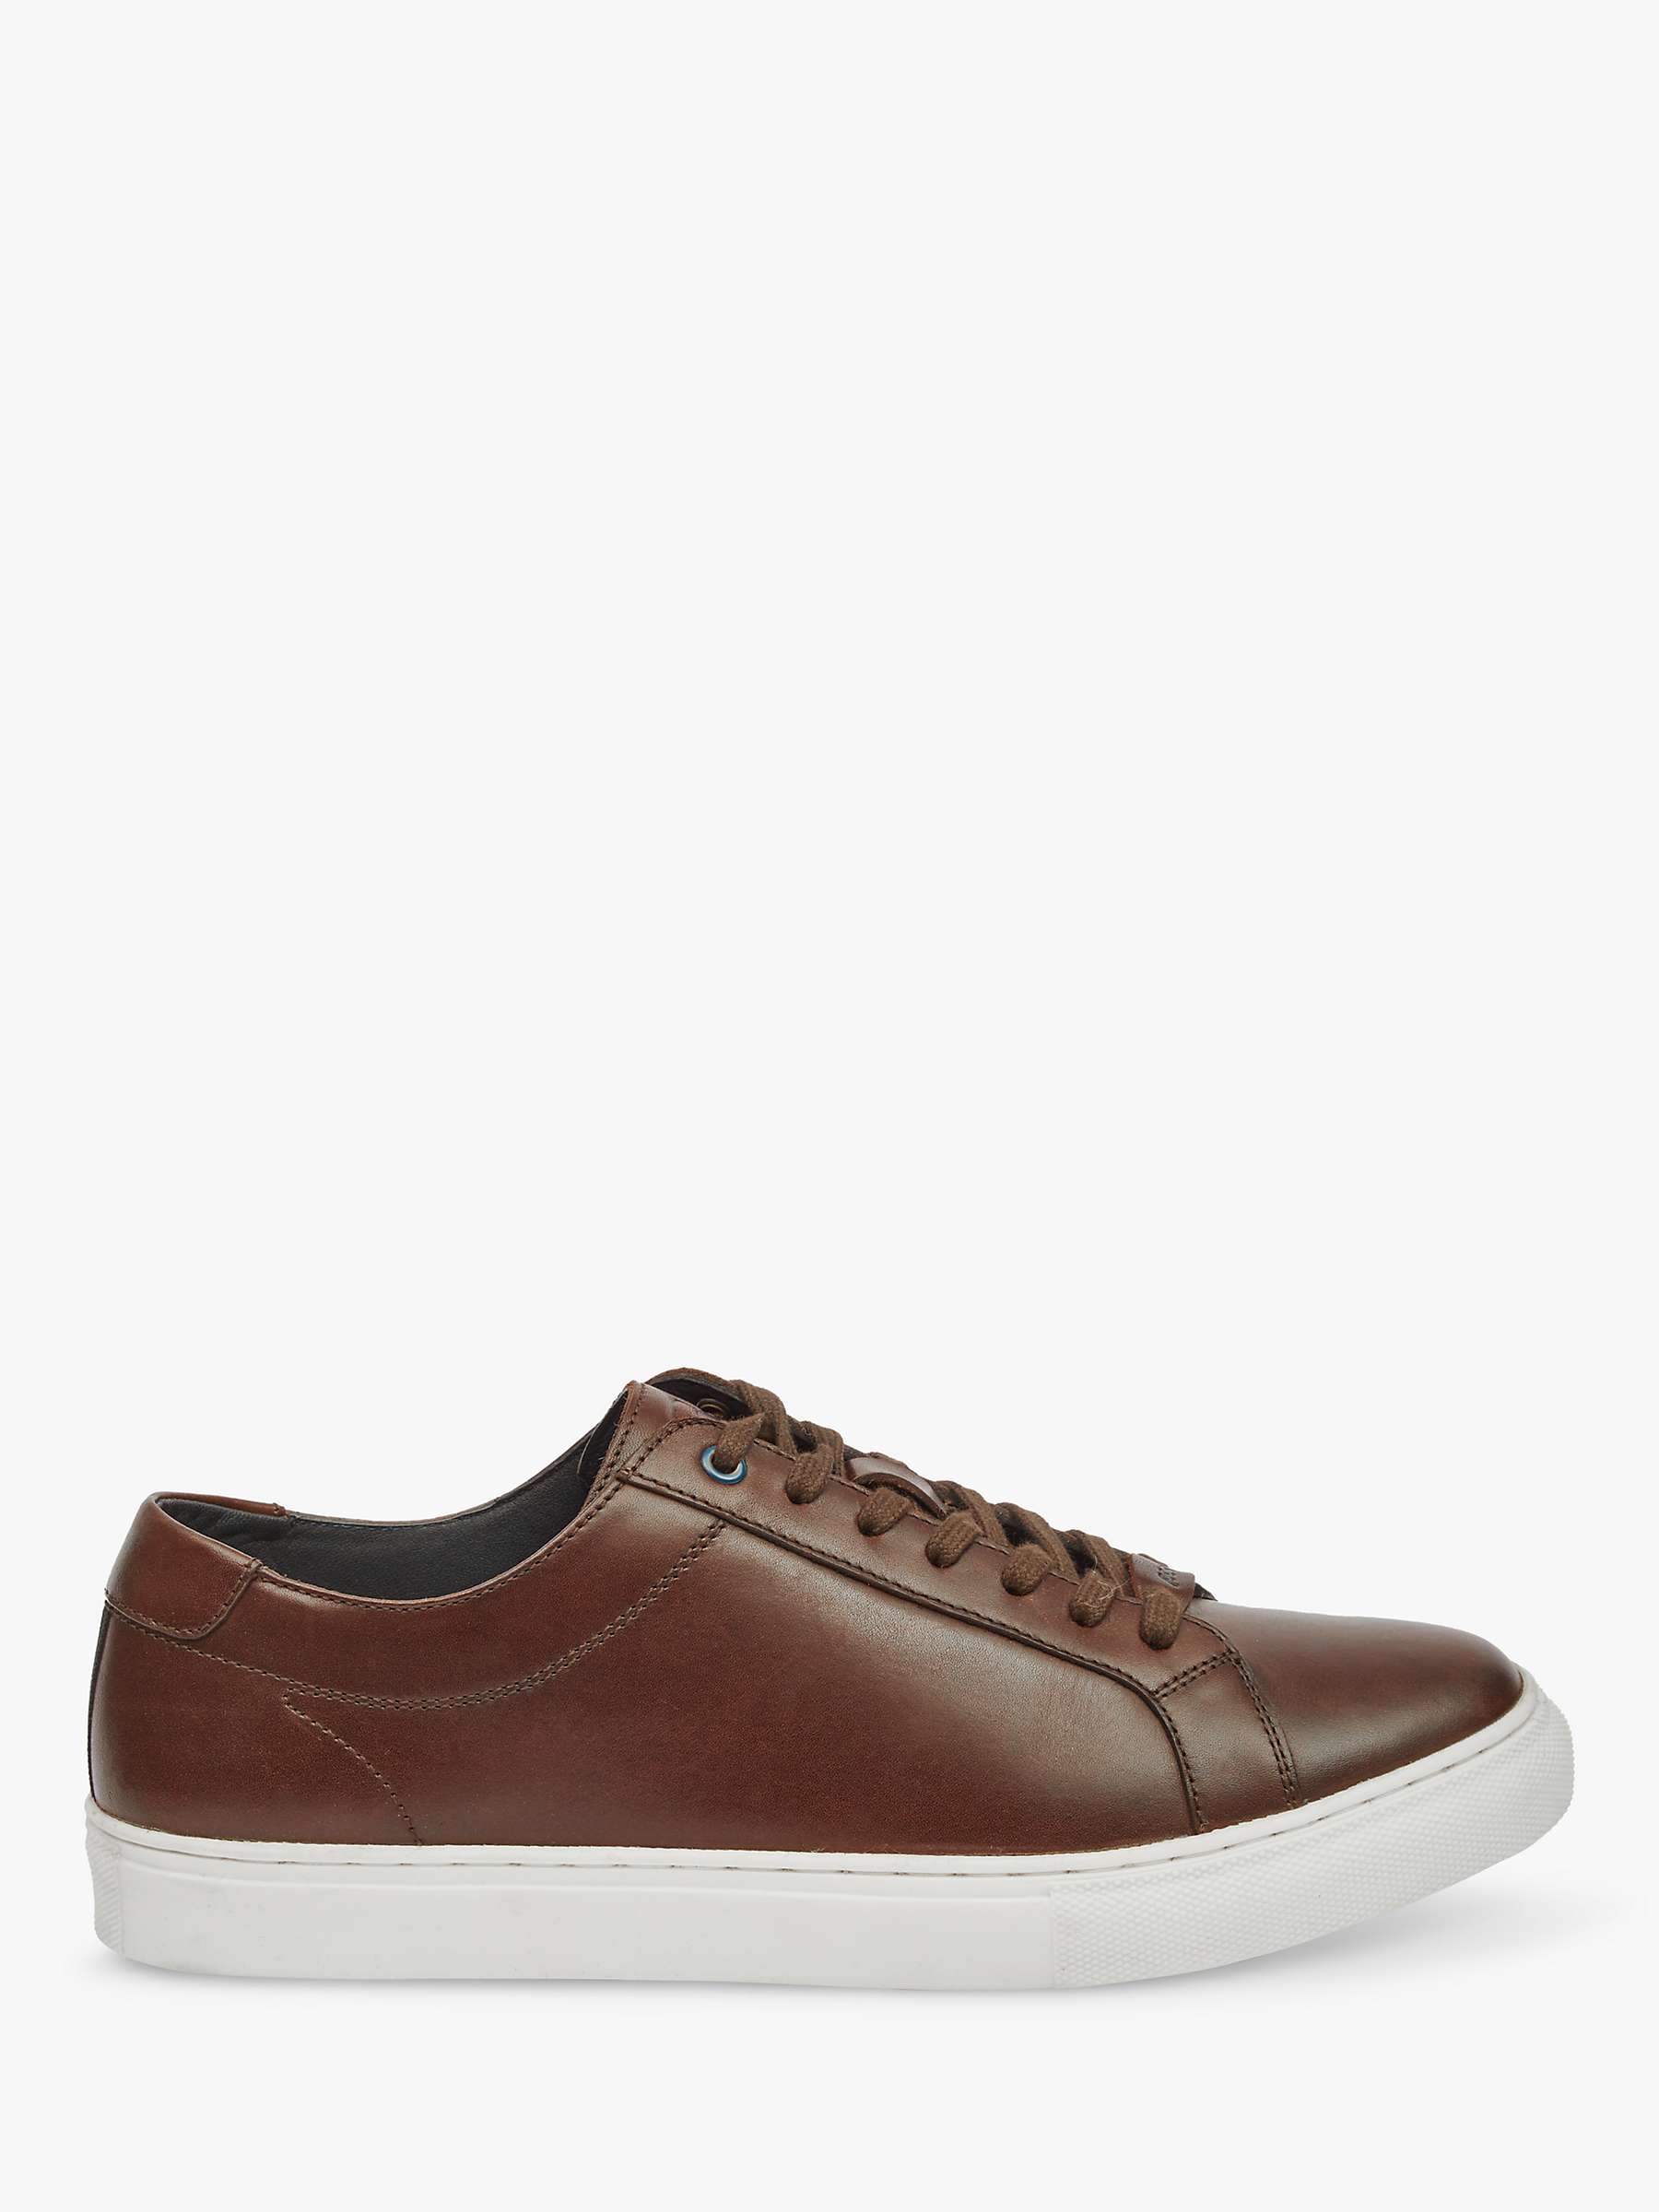 Mens Shoes Trainers Low-top trainers Brown for Men Element Leather Trainers in Dark Brown 